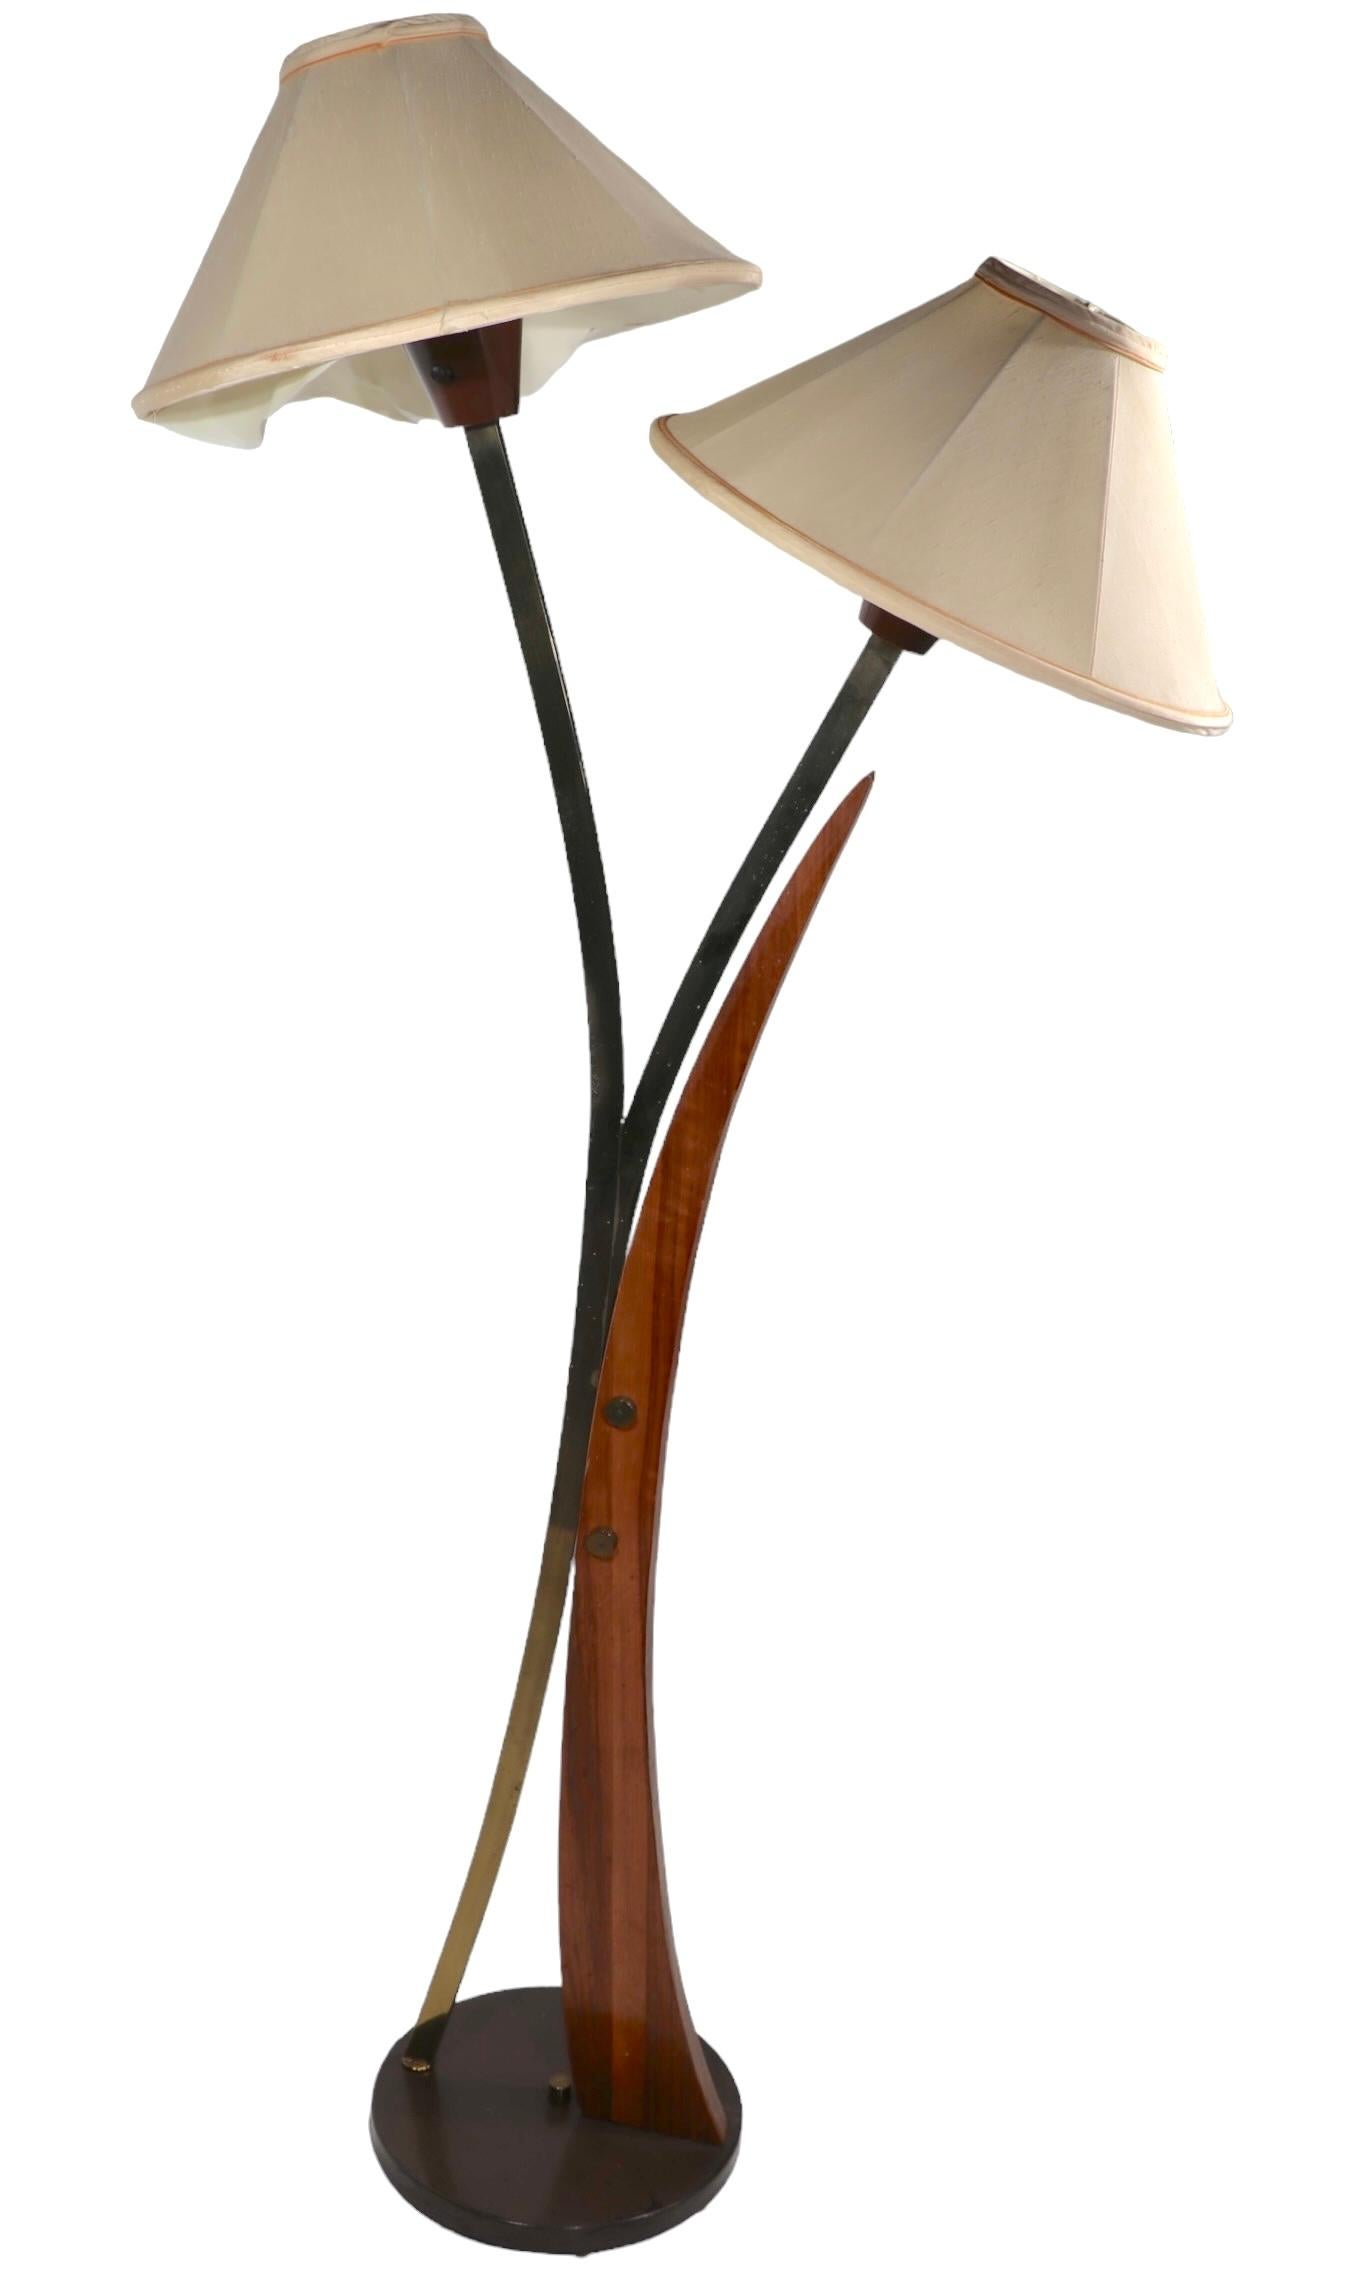 Exceptional Mid Century floor lamp having two exaggerated arms, each with a shaded light at the top. This example is in good, clean, work The sockets accept a standard size screw in bulb, each can be operated individually, shades are included but